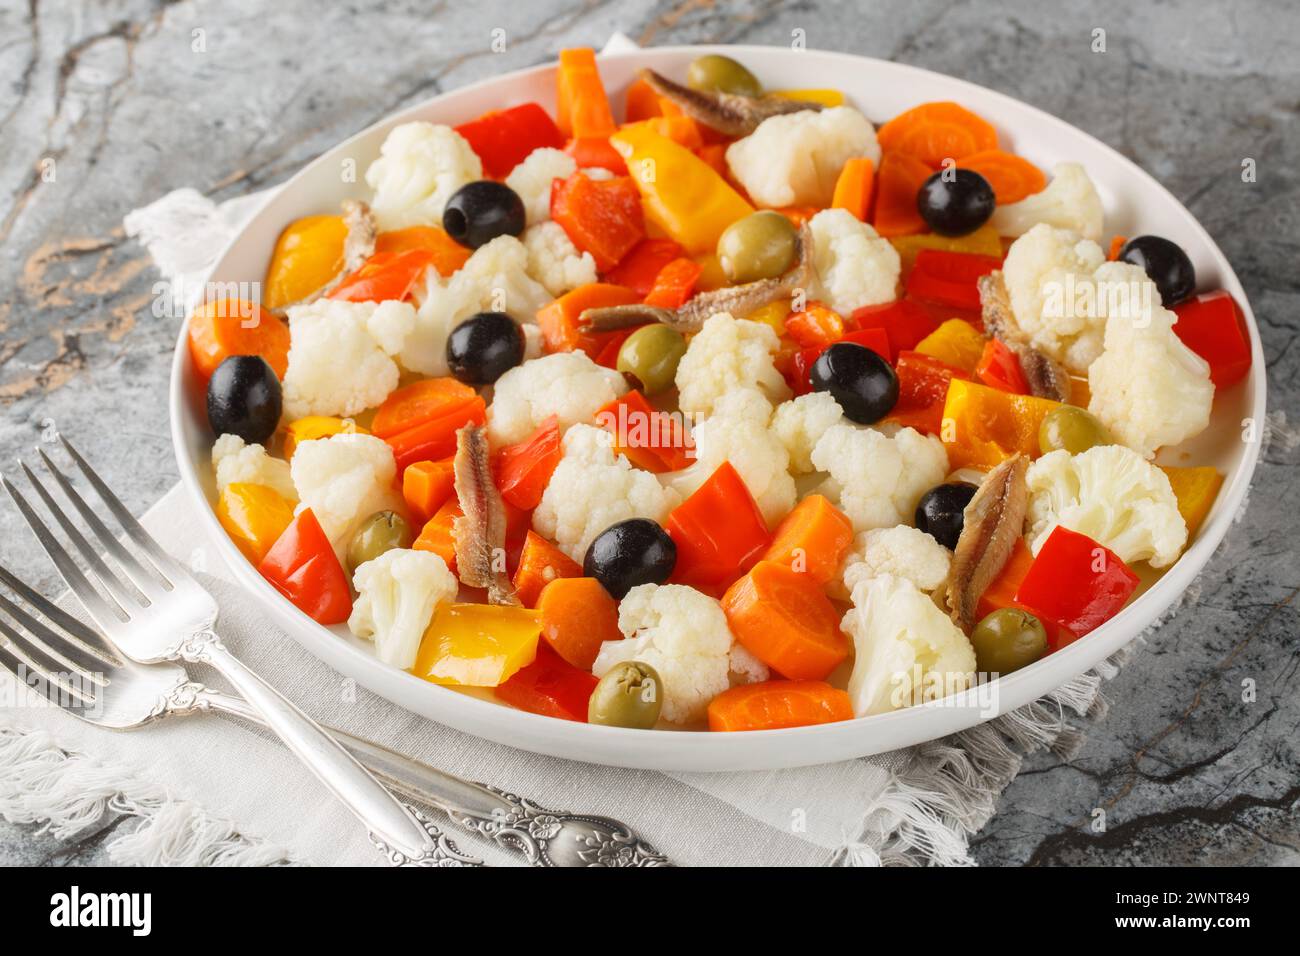 Festive Italian cauliflower salad with giardiniera, olives and anchovies close-up on a plate on the table. Horizontal Stock Photo